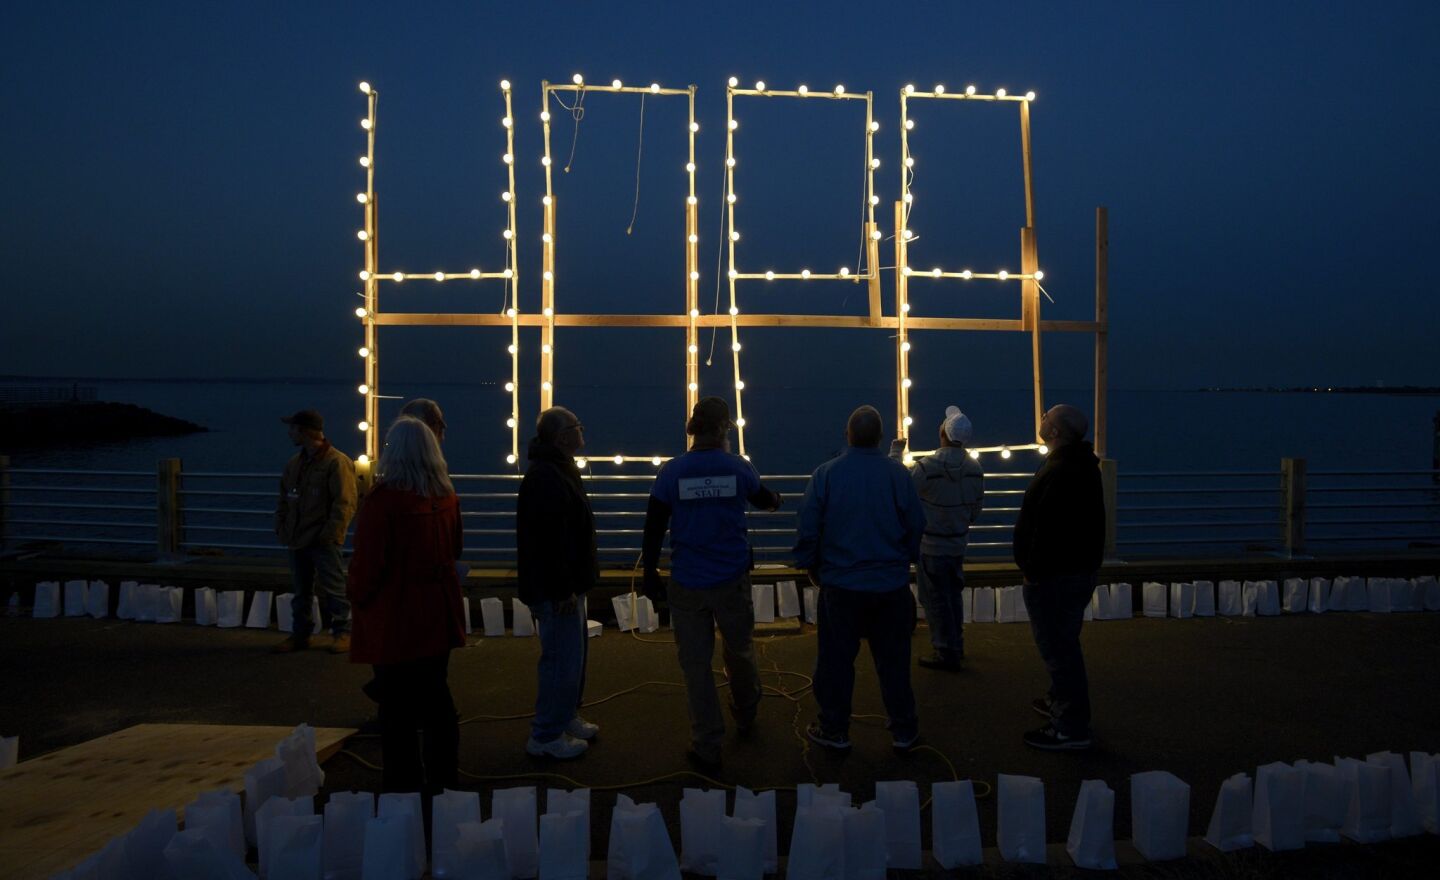 'Hope' is spelled out in lights at a community ceremony in Union Beach, N.J., marking the one-year anniversary of Superstorm Sandy.